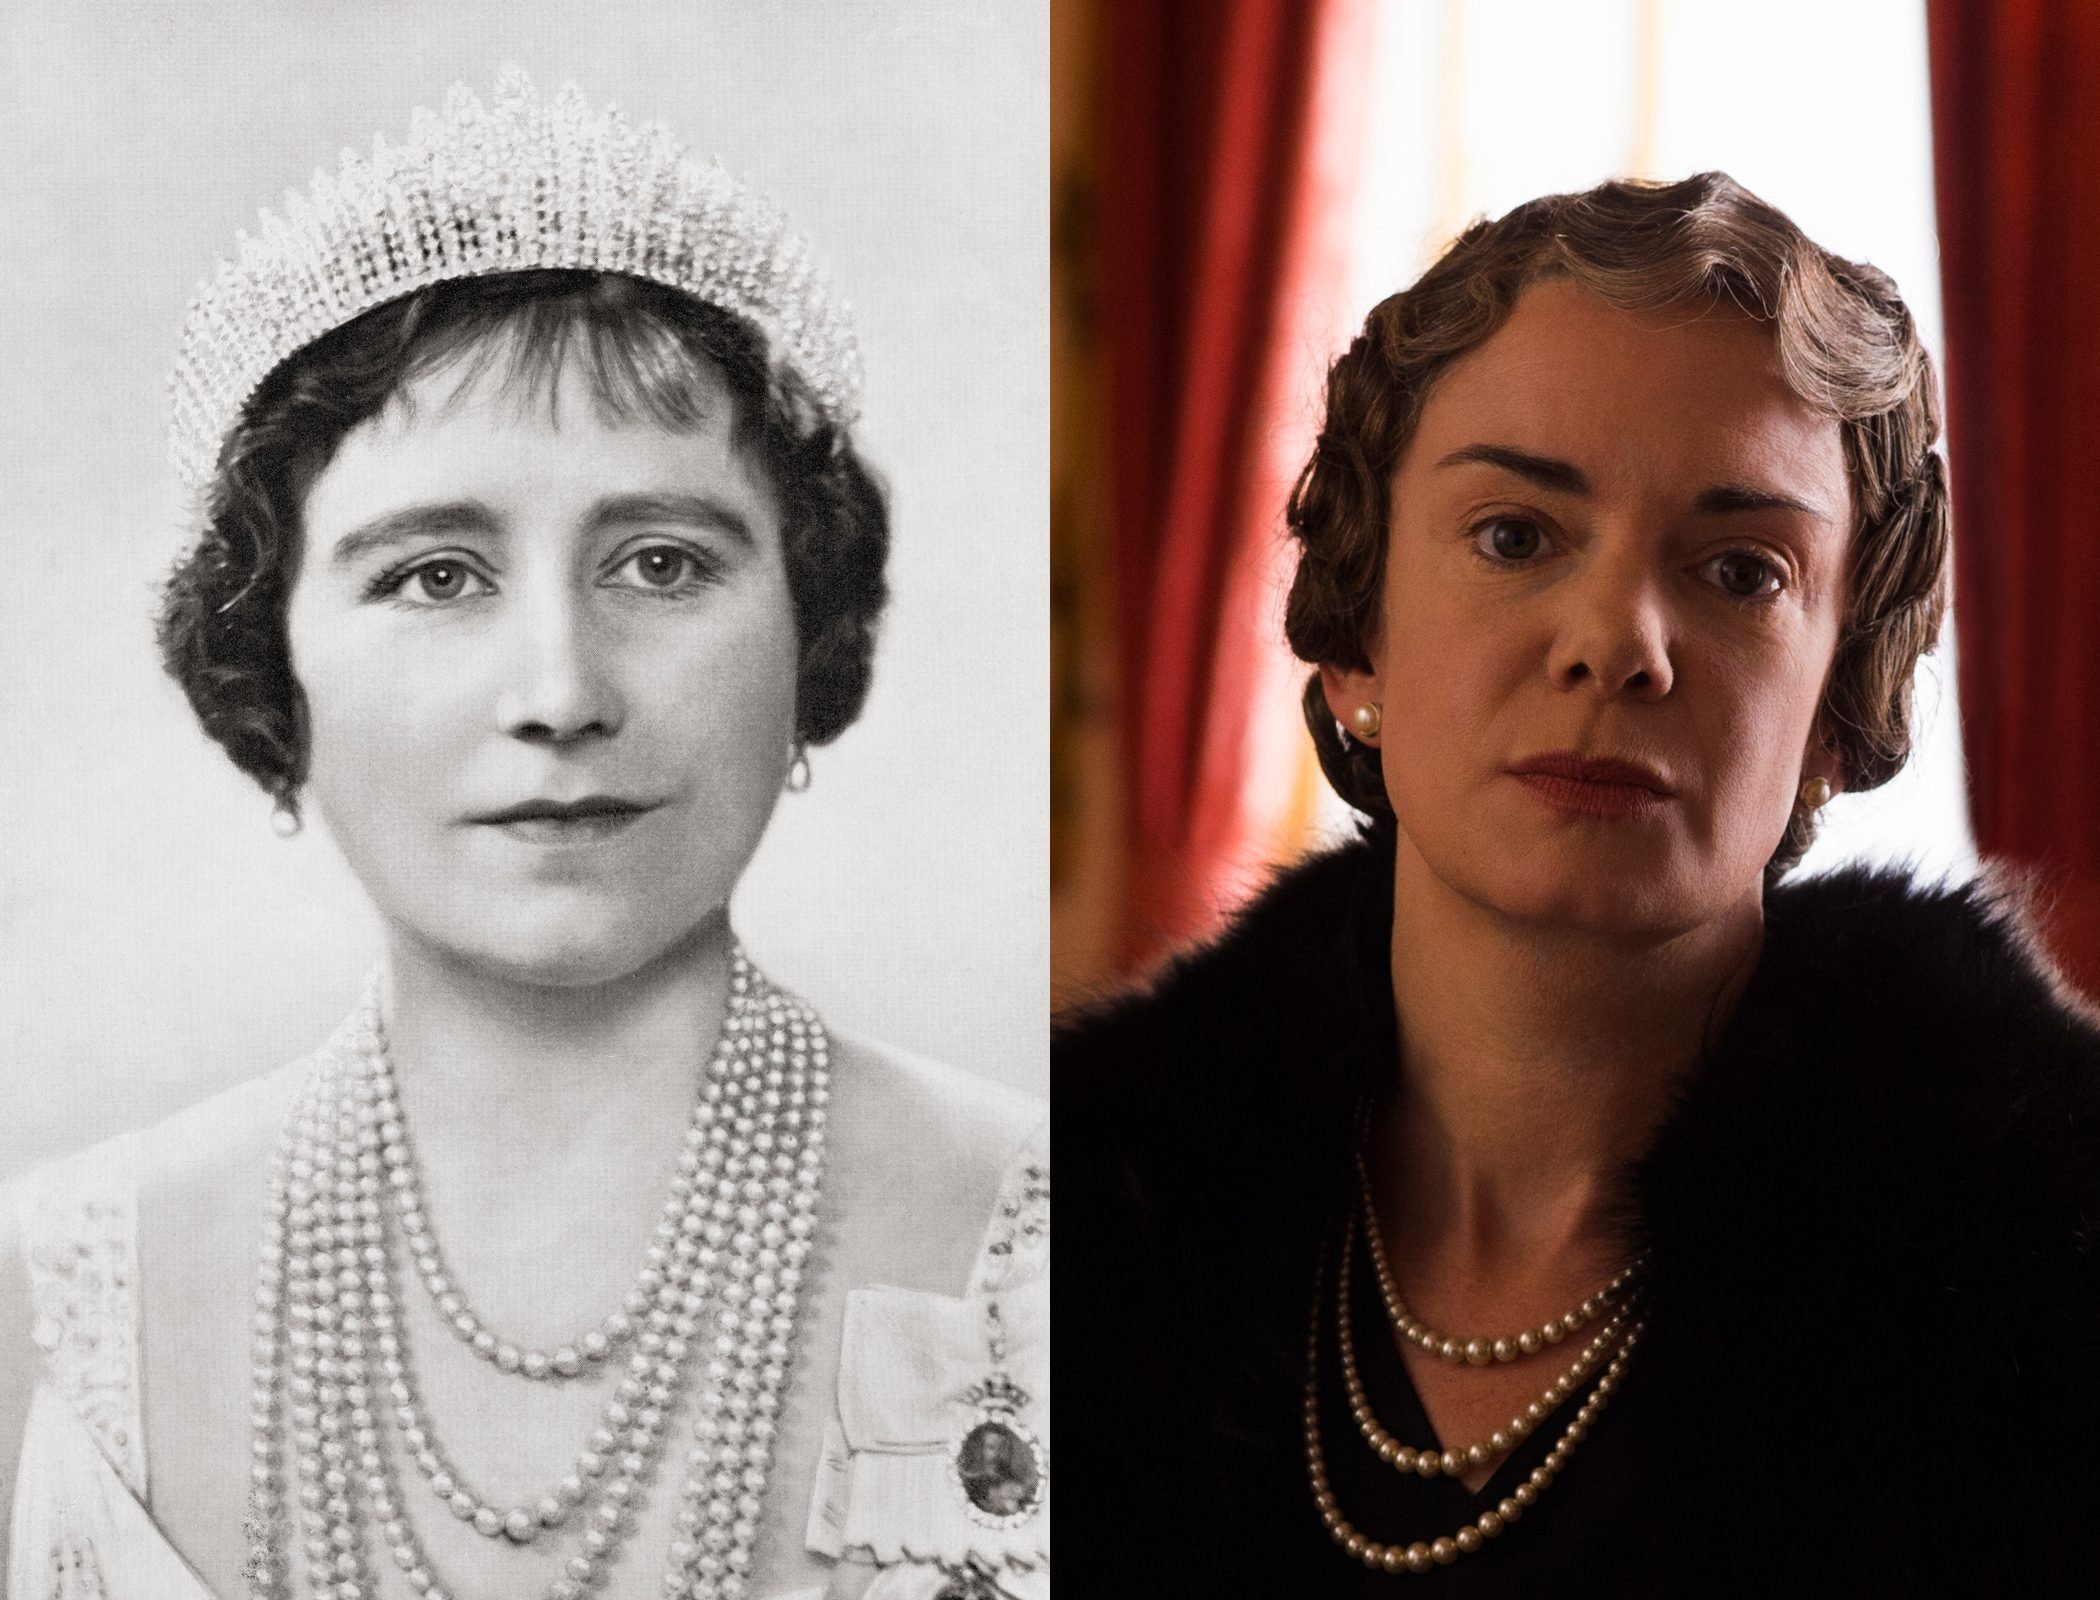 The Queen Consort, Queen Elizabeth, and later, the Queen Mother, as played by Victoria Hamilton